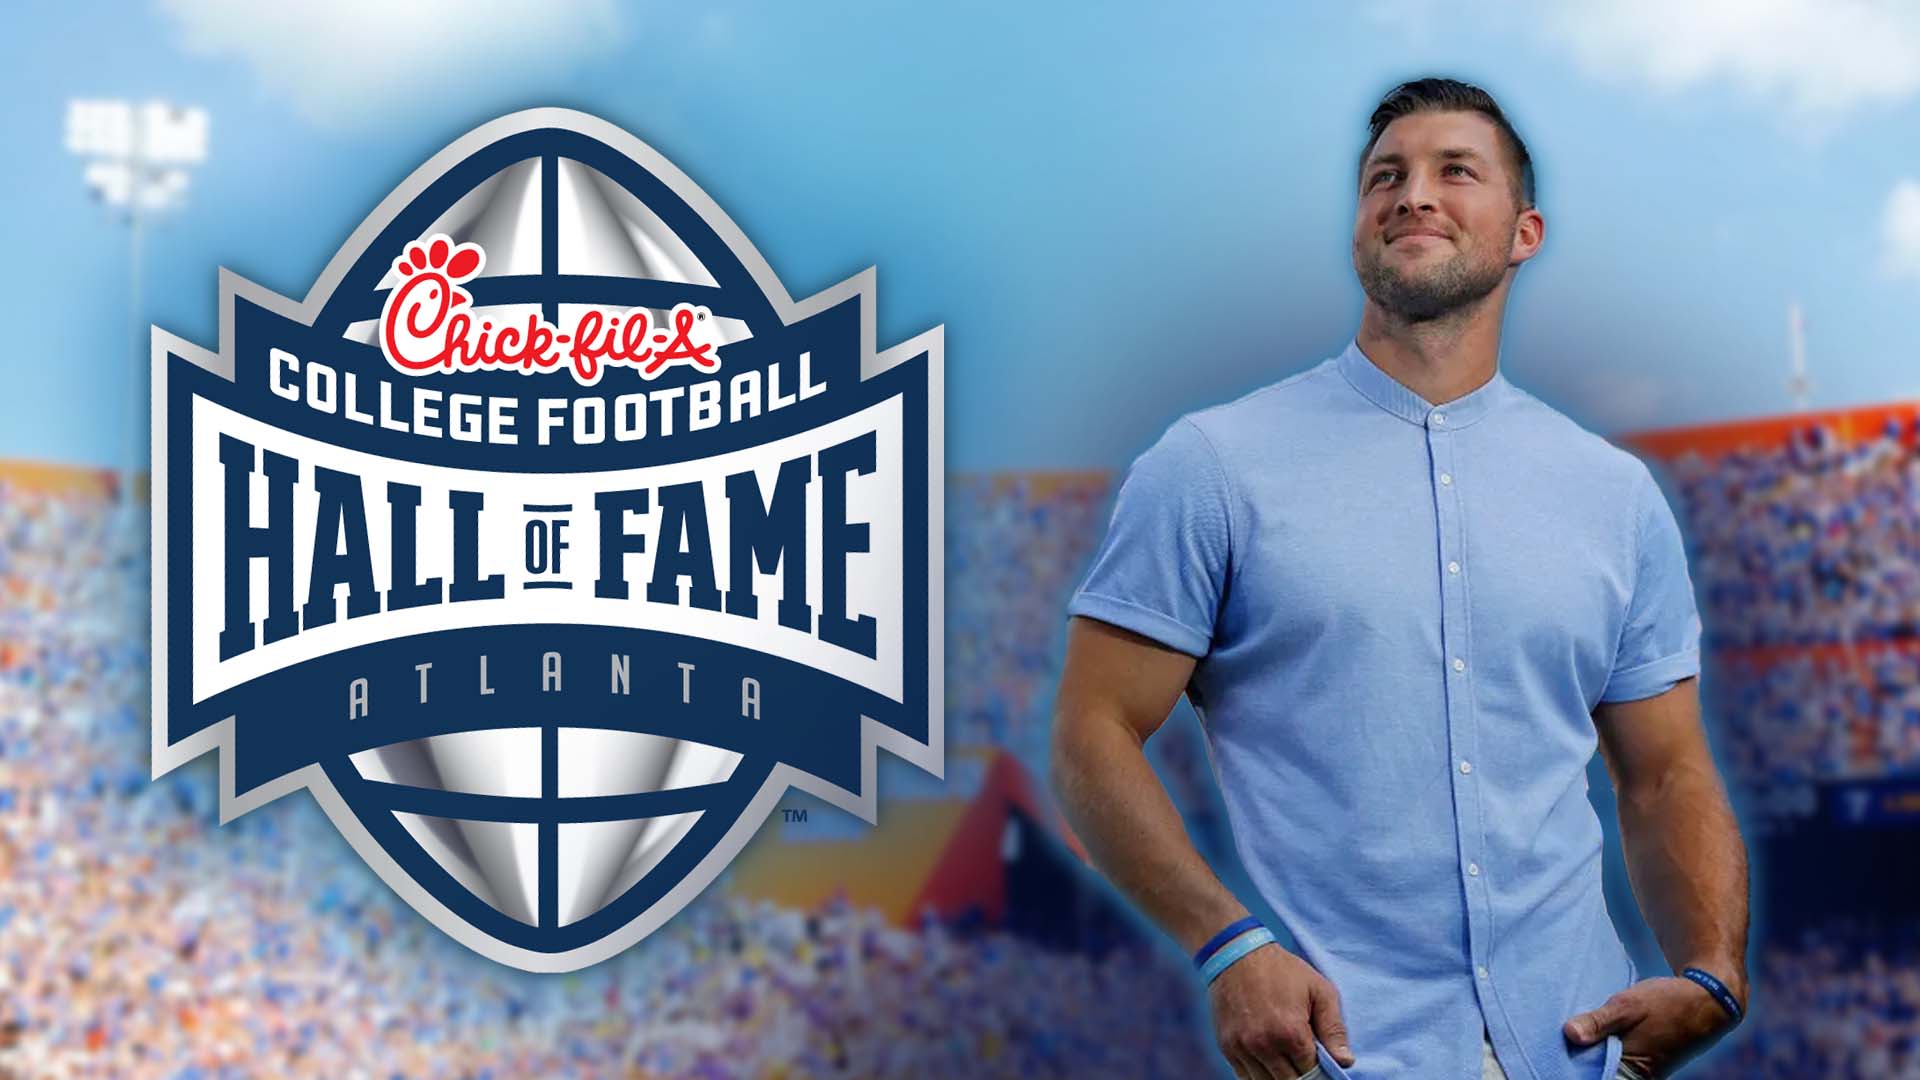 Tim Tebow Reacts to His Induction into the College Football Hall of Fame